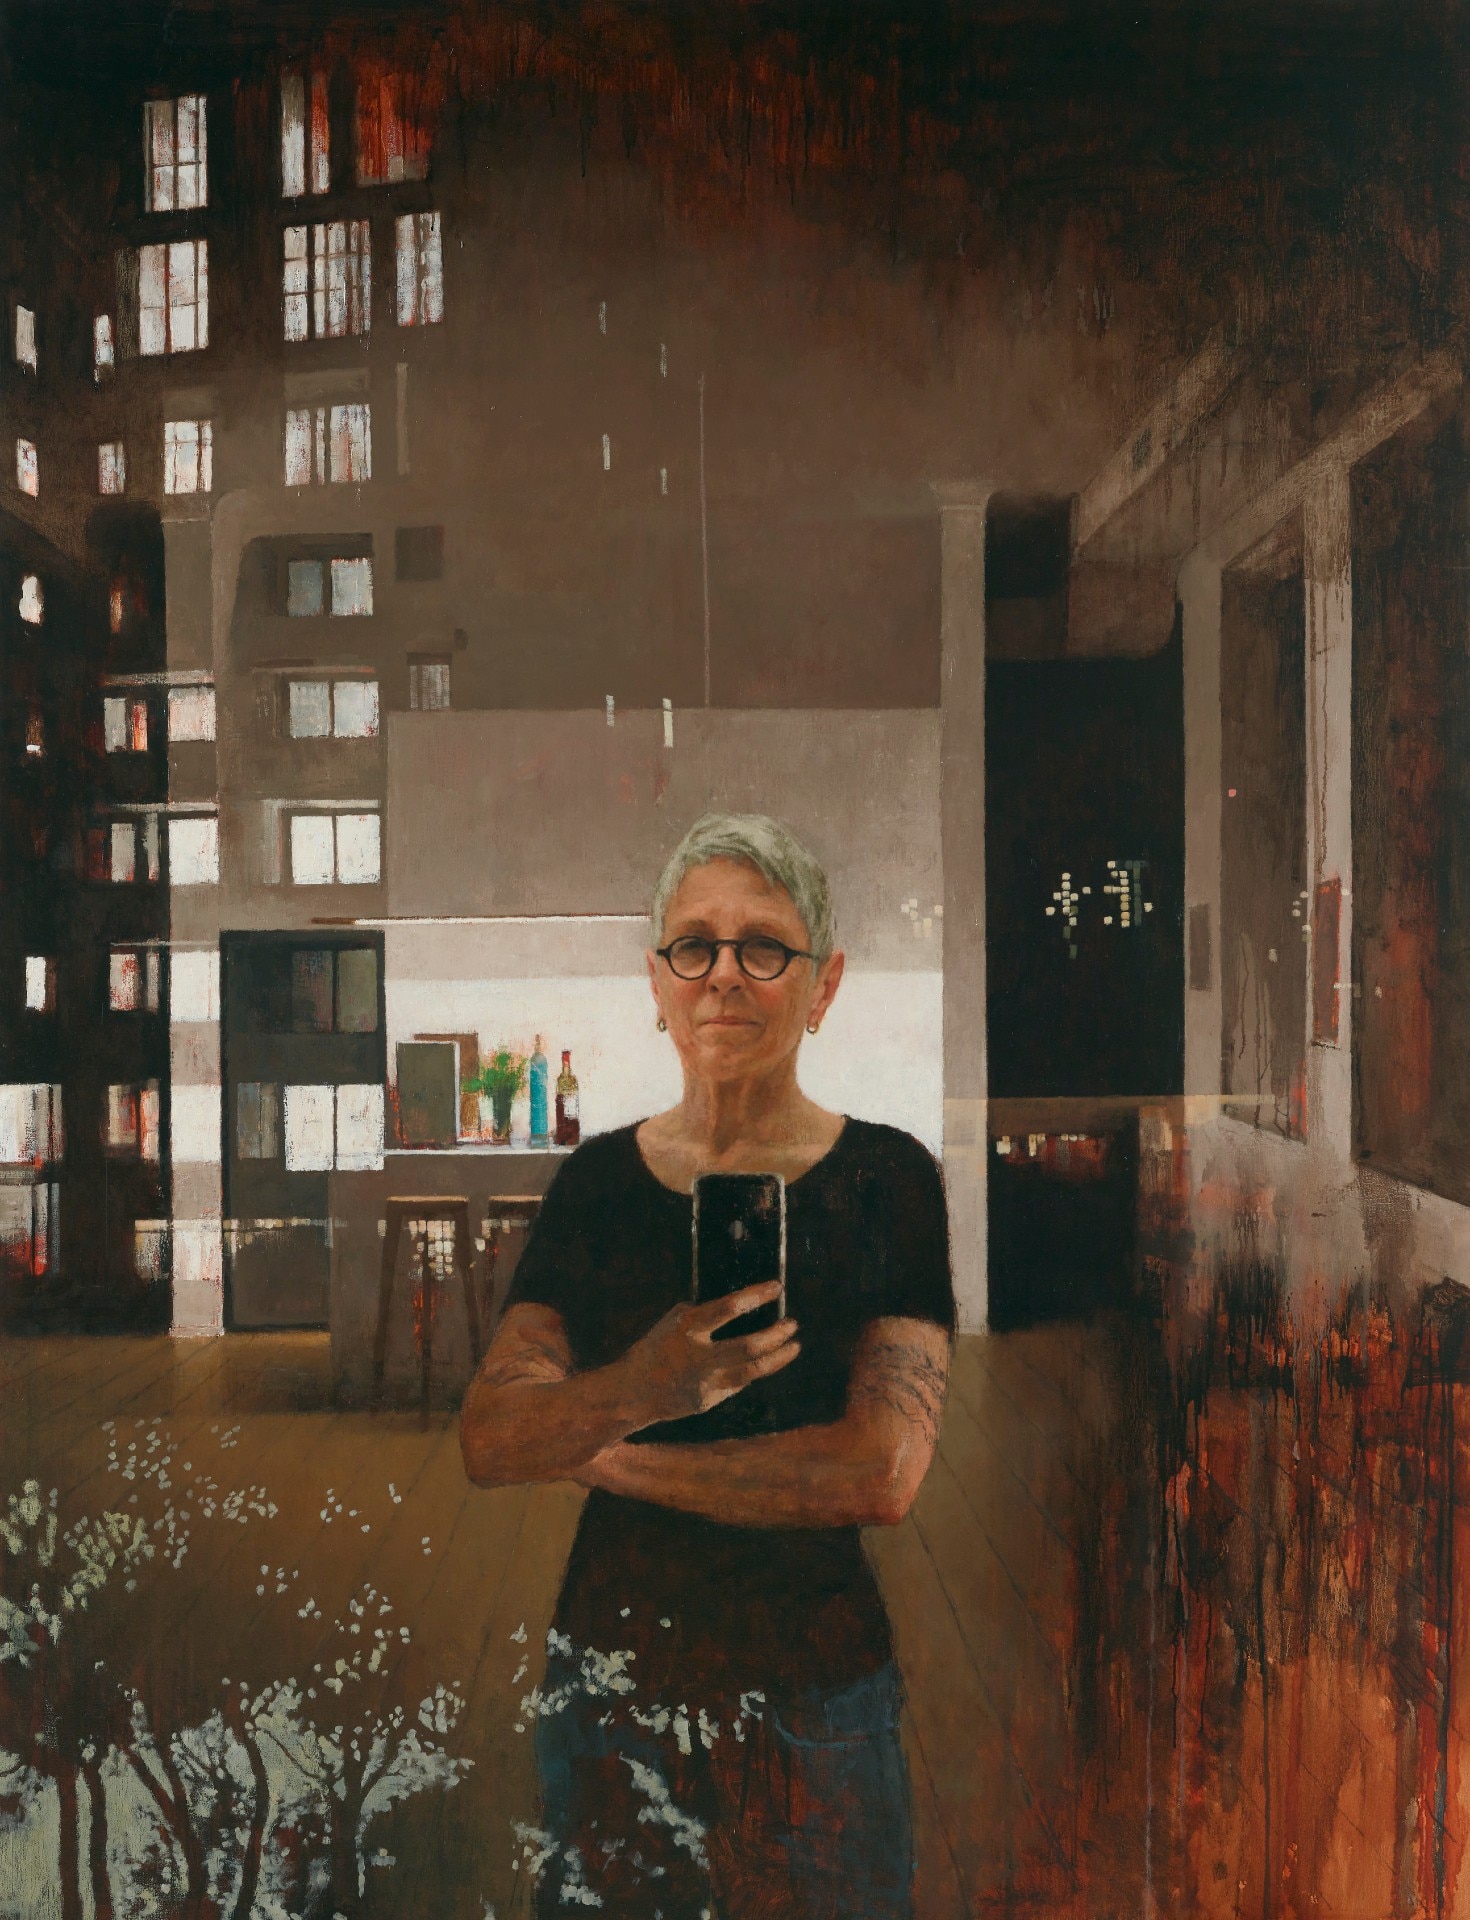 A painting of Jude Rae's reflection in a window, taking a selfie with her phone, showing the reflection and the view outside